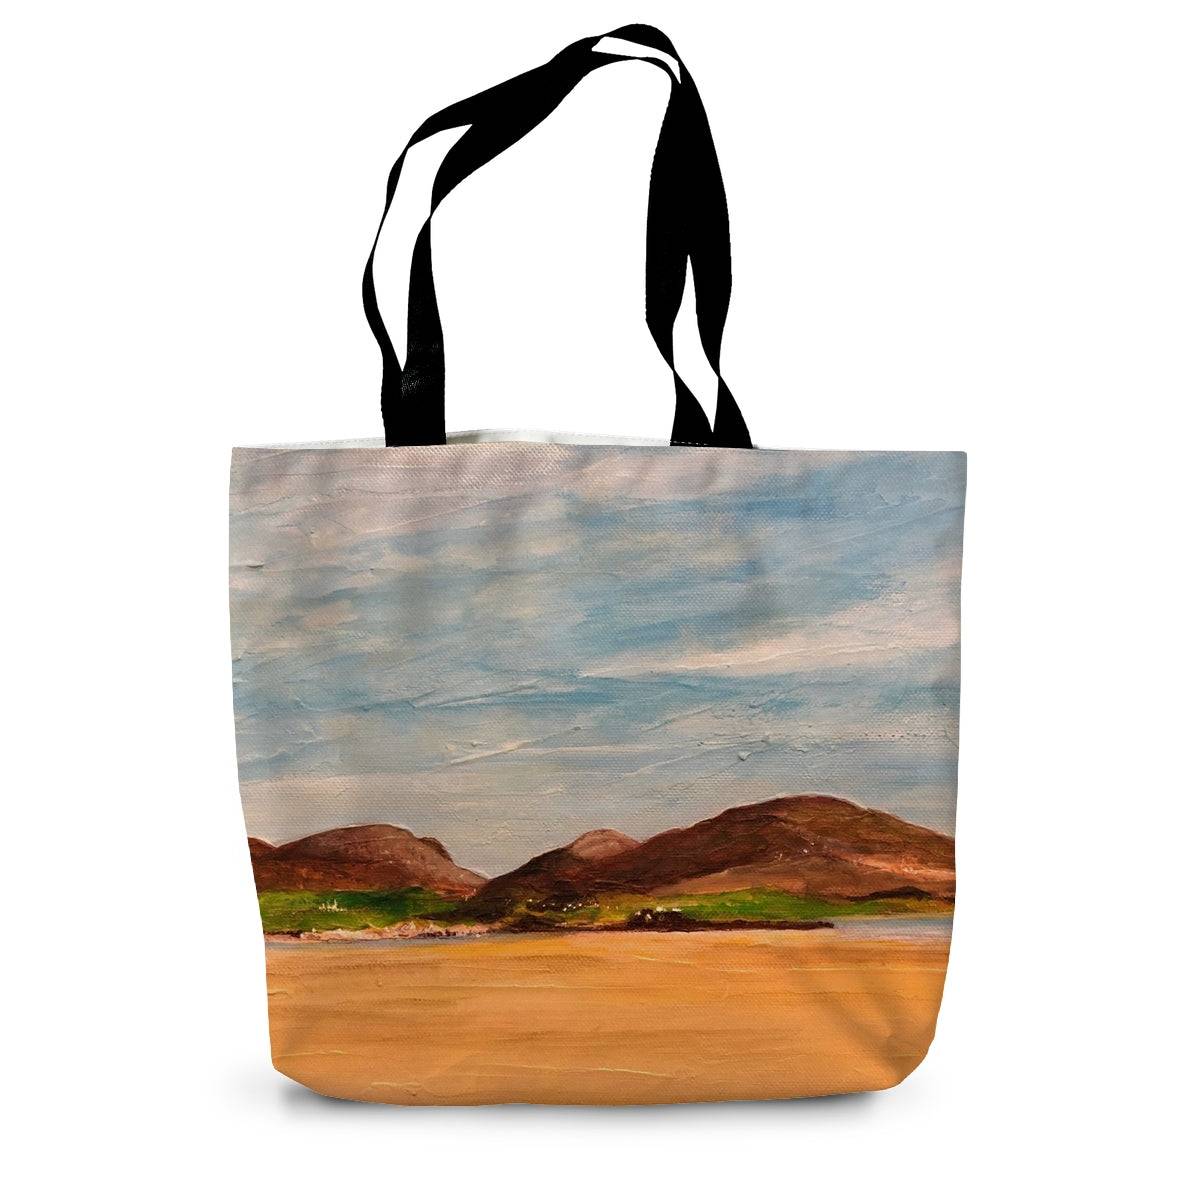 Uig Sands Lewis Art Gifts Canvas Tote Bag-Bags-Hebridean Islands Art Gallery-14"x18.5"-Paintings, Prints, Homeware, Art Gifts From Scotland By Scottish Artist Kevin Hunter